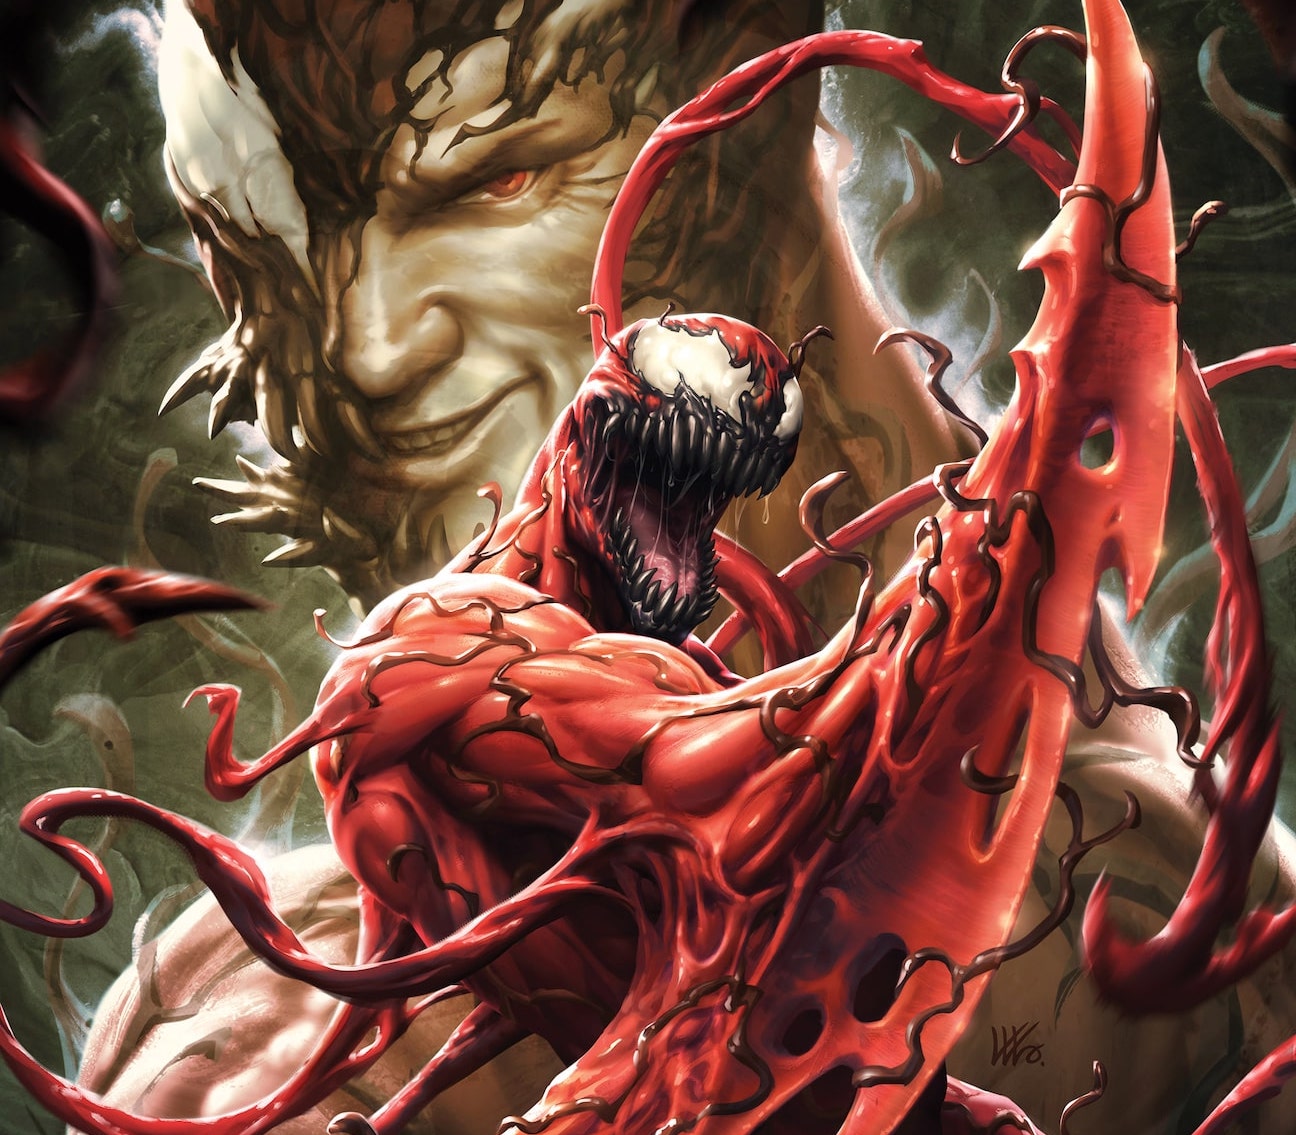 Marvel celebrates Carnage's 30th anniversary with 'Carnage Forever' #1